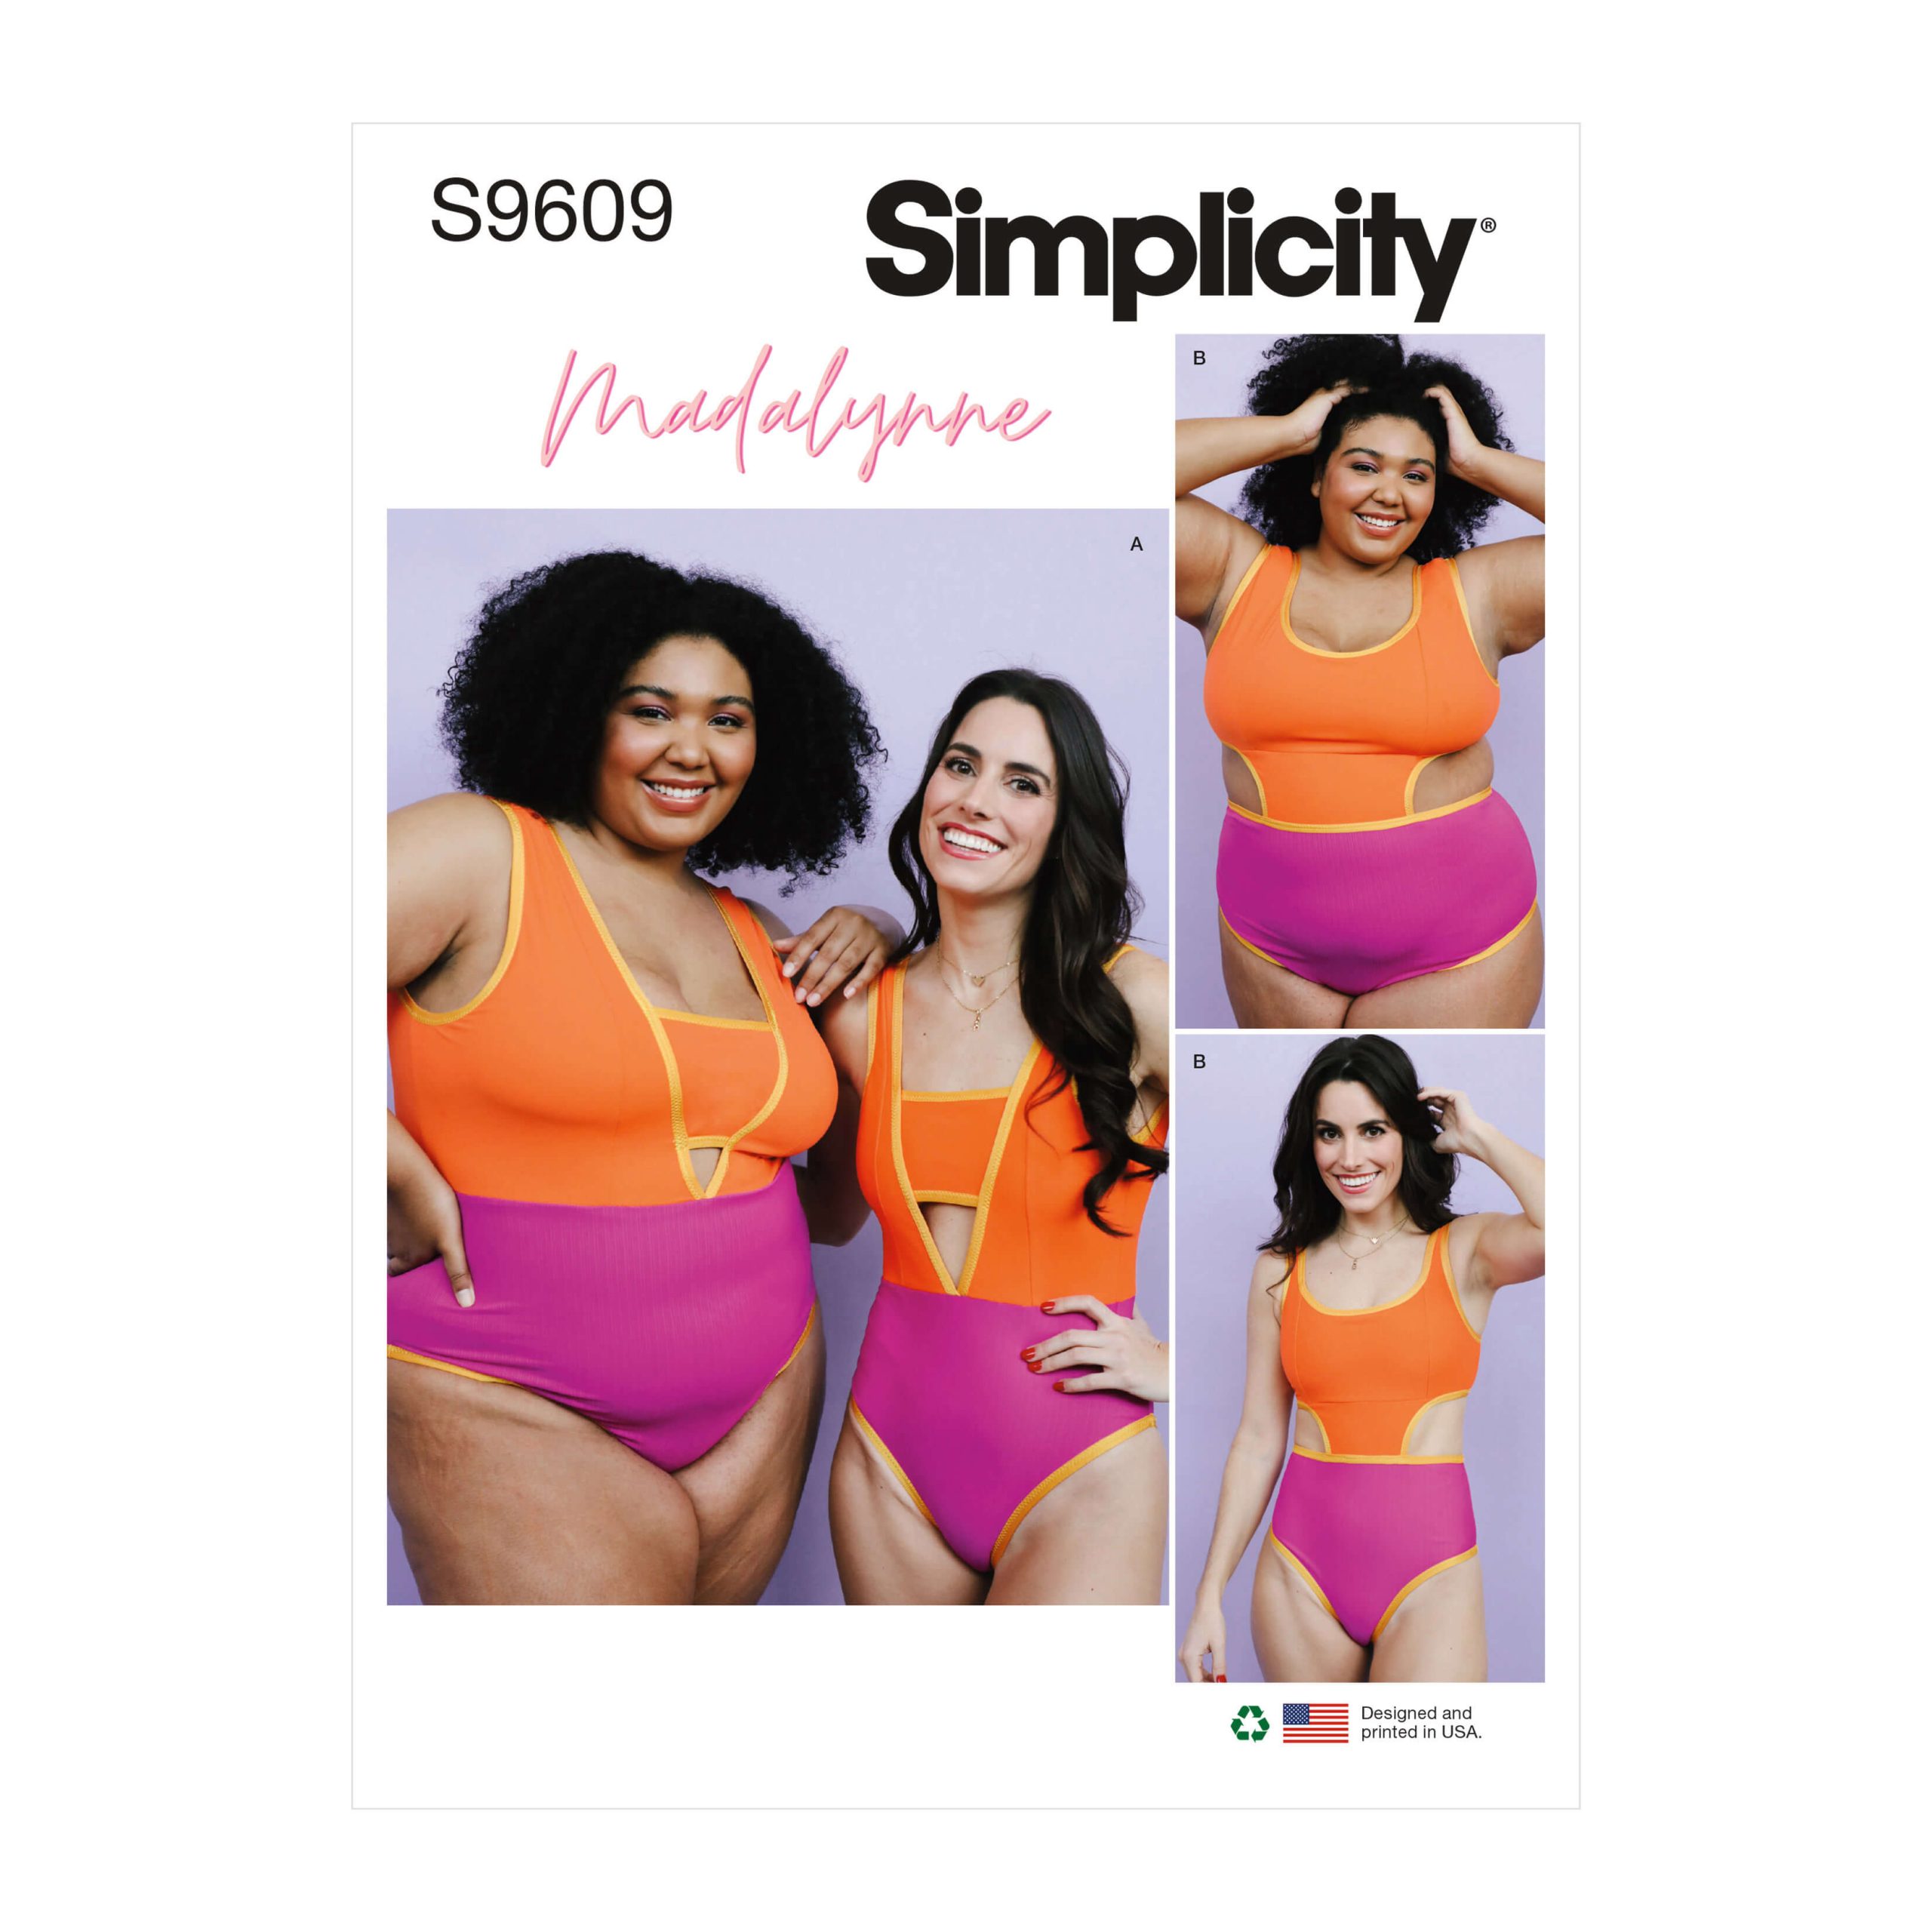 Simplicity Sewing Pattern S9609 Misses' and Women's Swimsuits by Madalynne